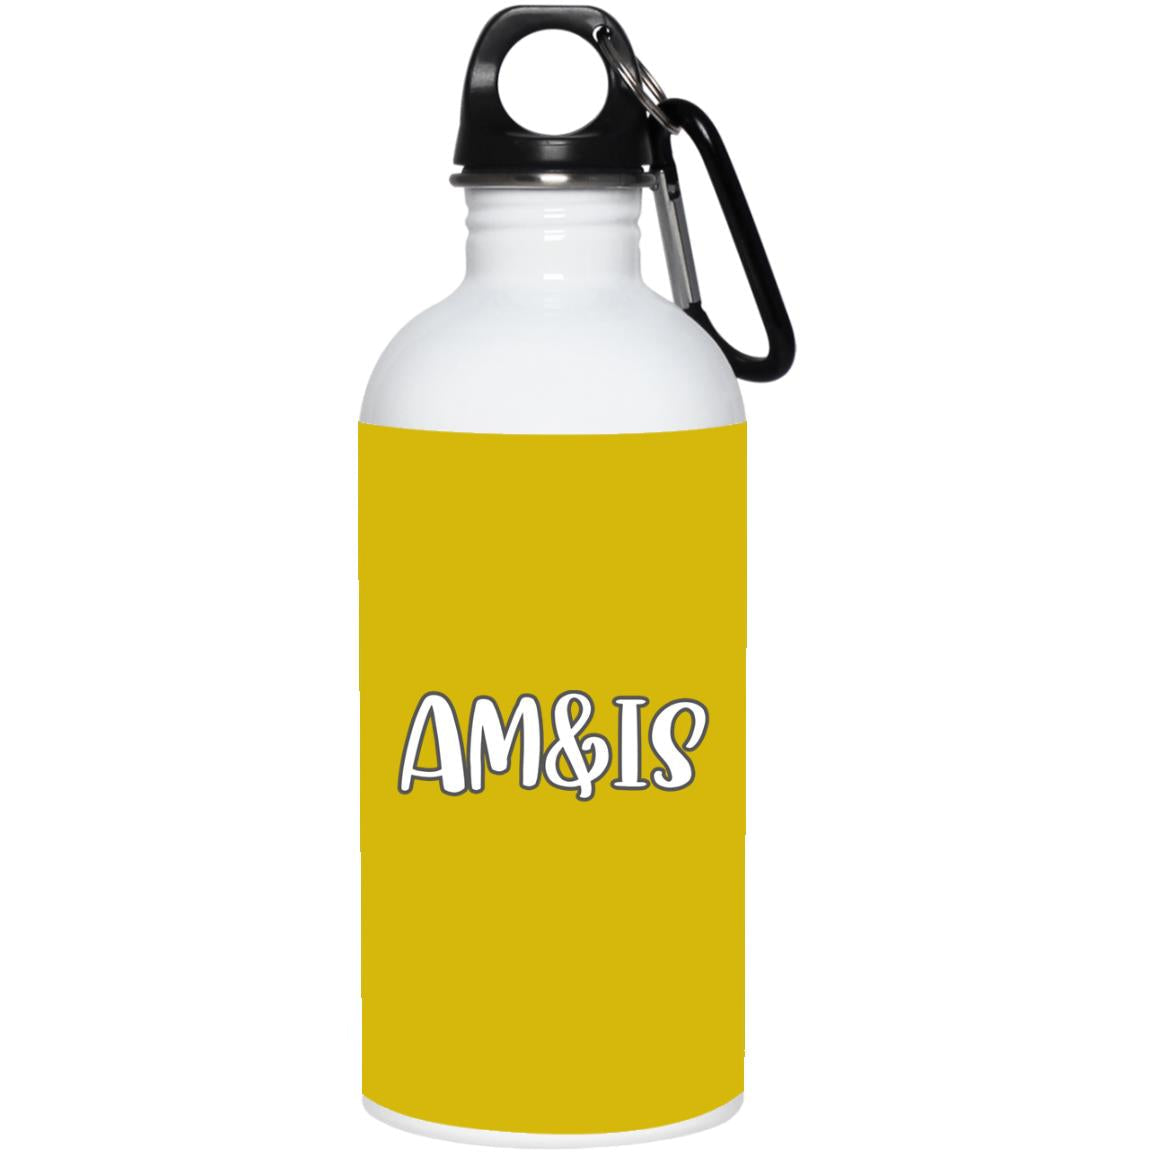 OLD GOLD ONE SIZE - AM&IS Activewear 20 oz. Stainless Steel Water Bottle - Drinkware at TFC&H Co.